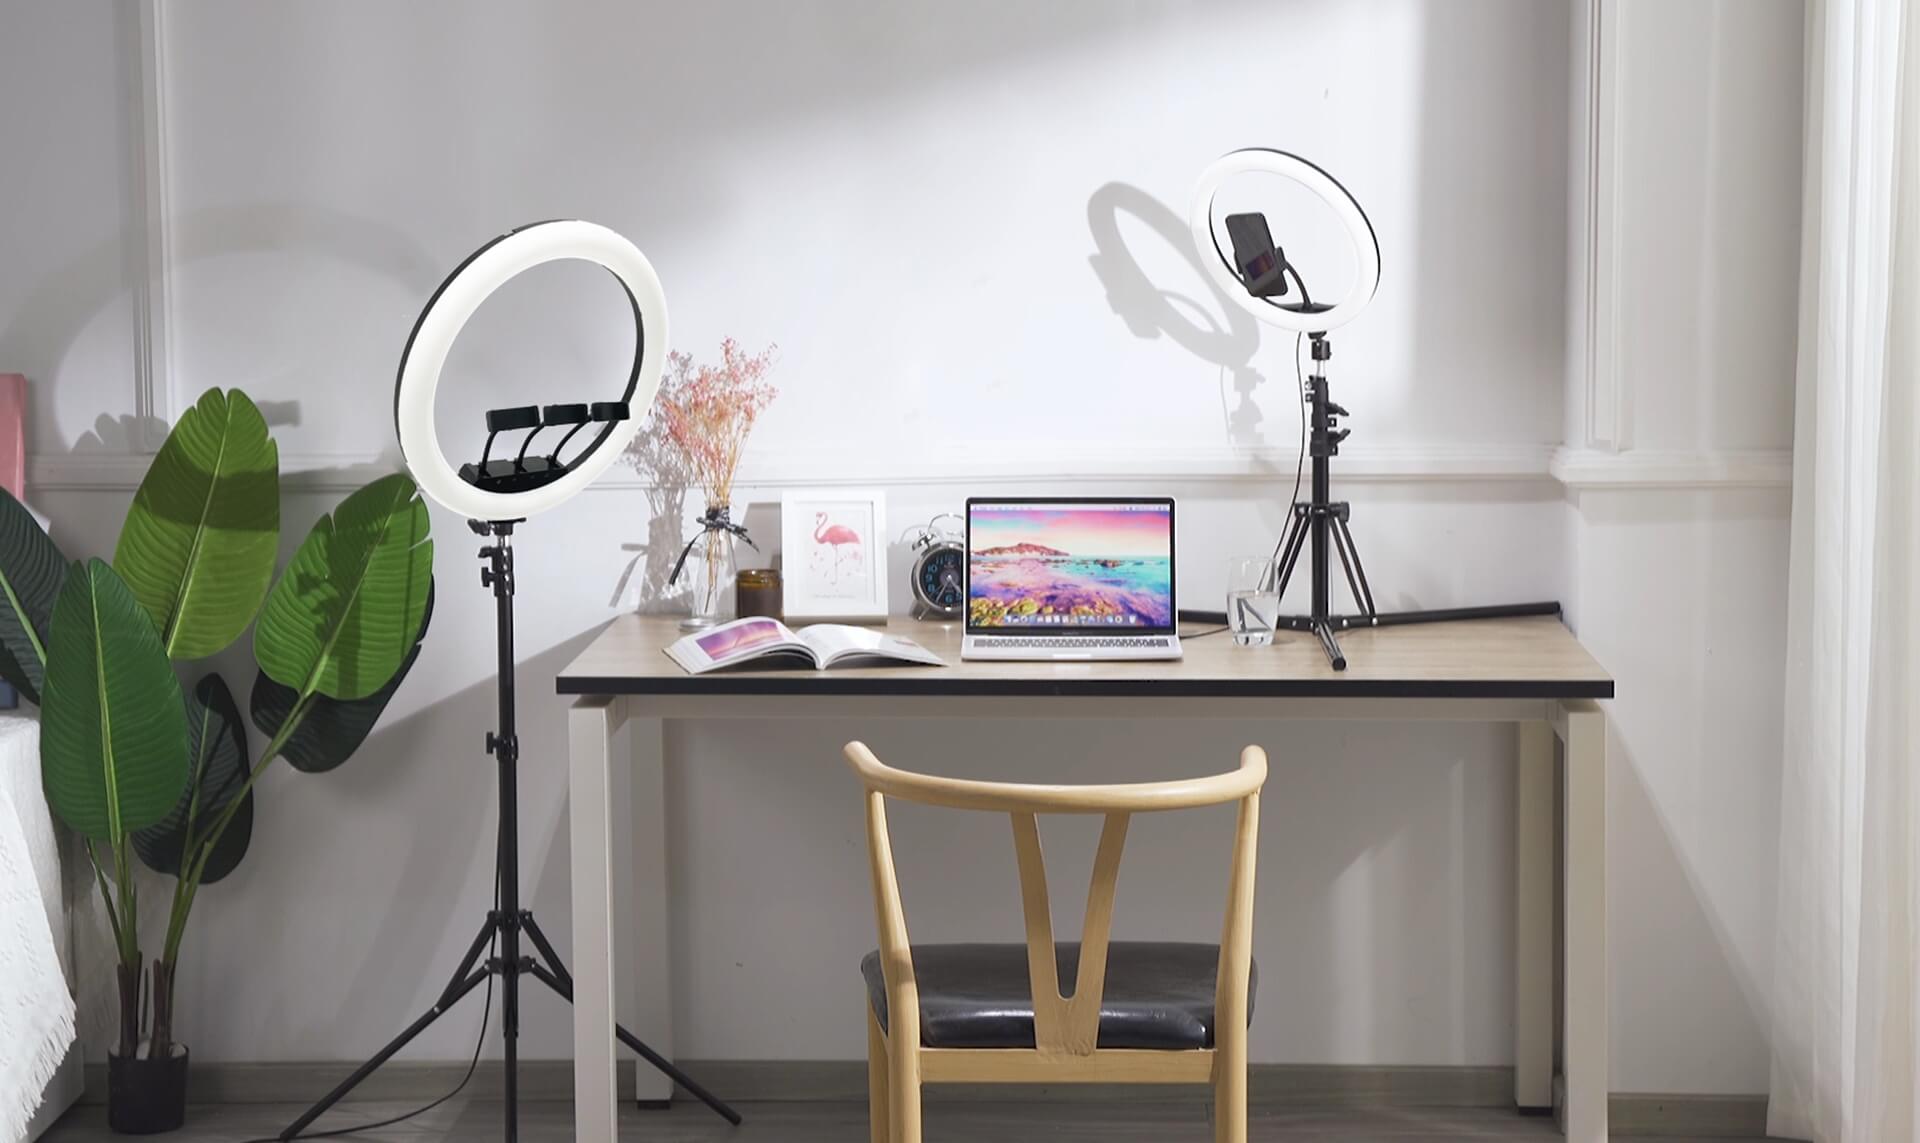 Vidlok Selfie Ring Light | Your First Choice For Live Broadcasting